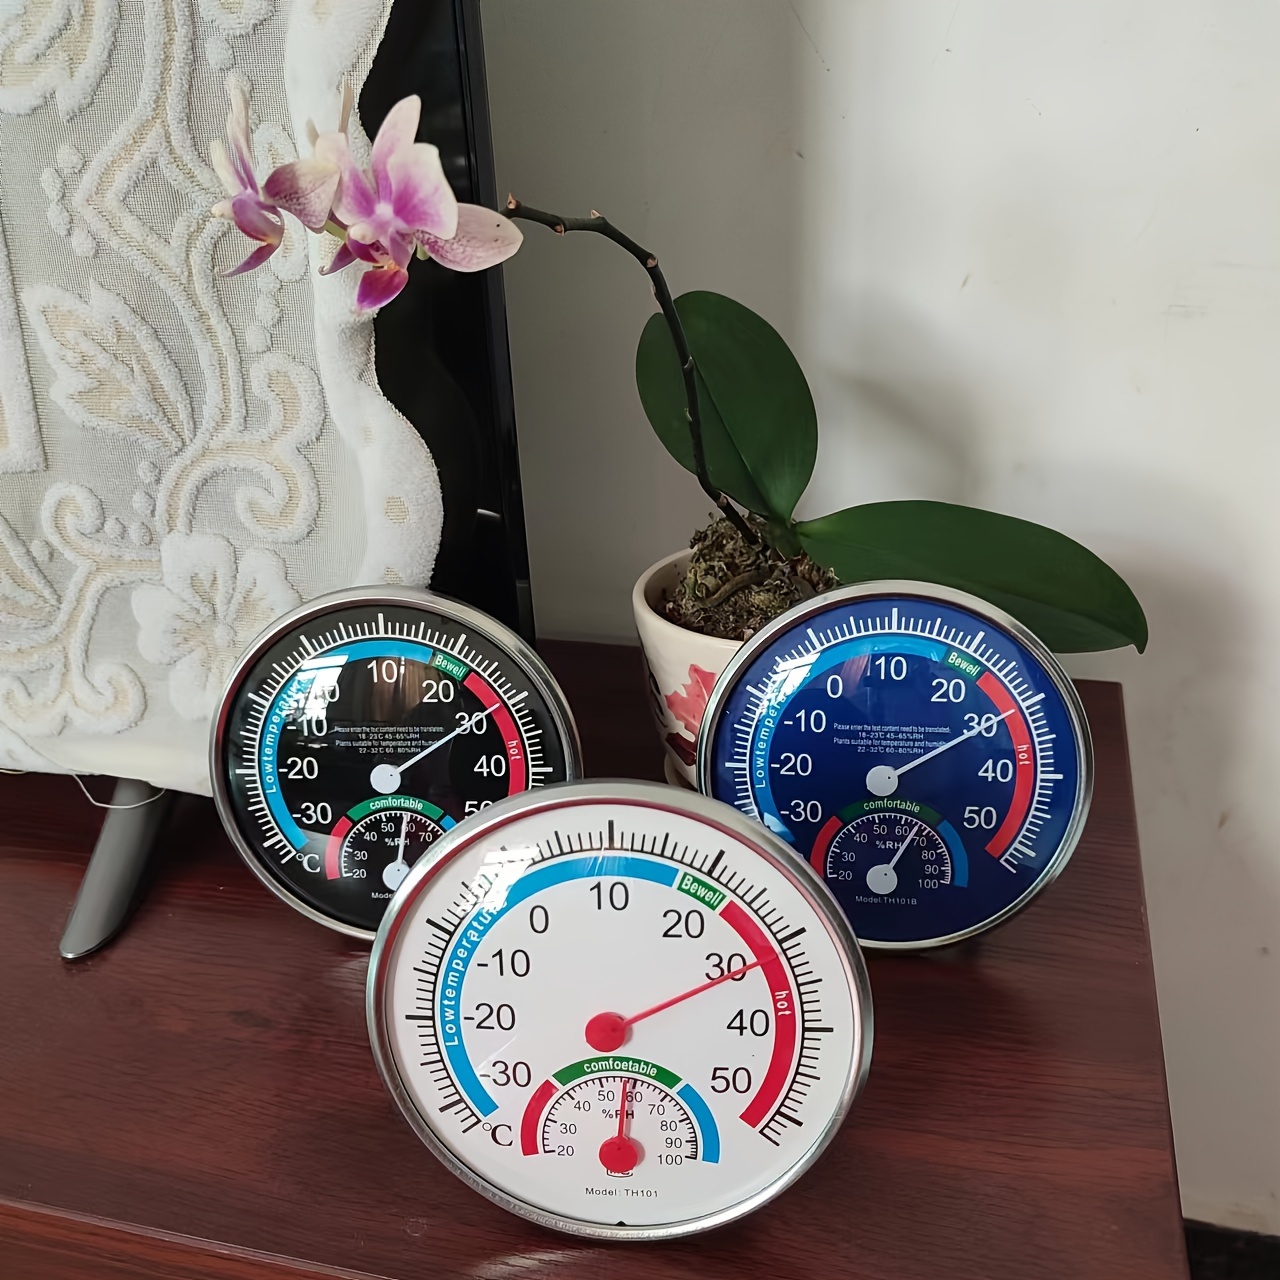 

1pc, Temperature And Humidity Meter, Indoor And Outdoor, Battery-free, Desktop, Wall-mounted, Let You Feel The Temperature Around You At Any Time